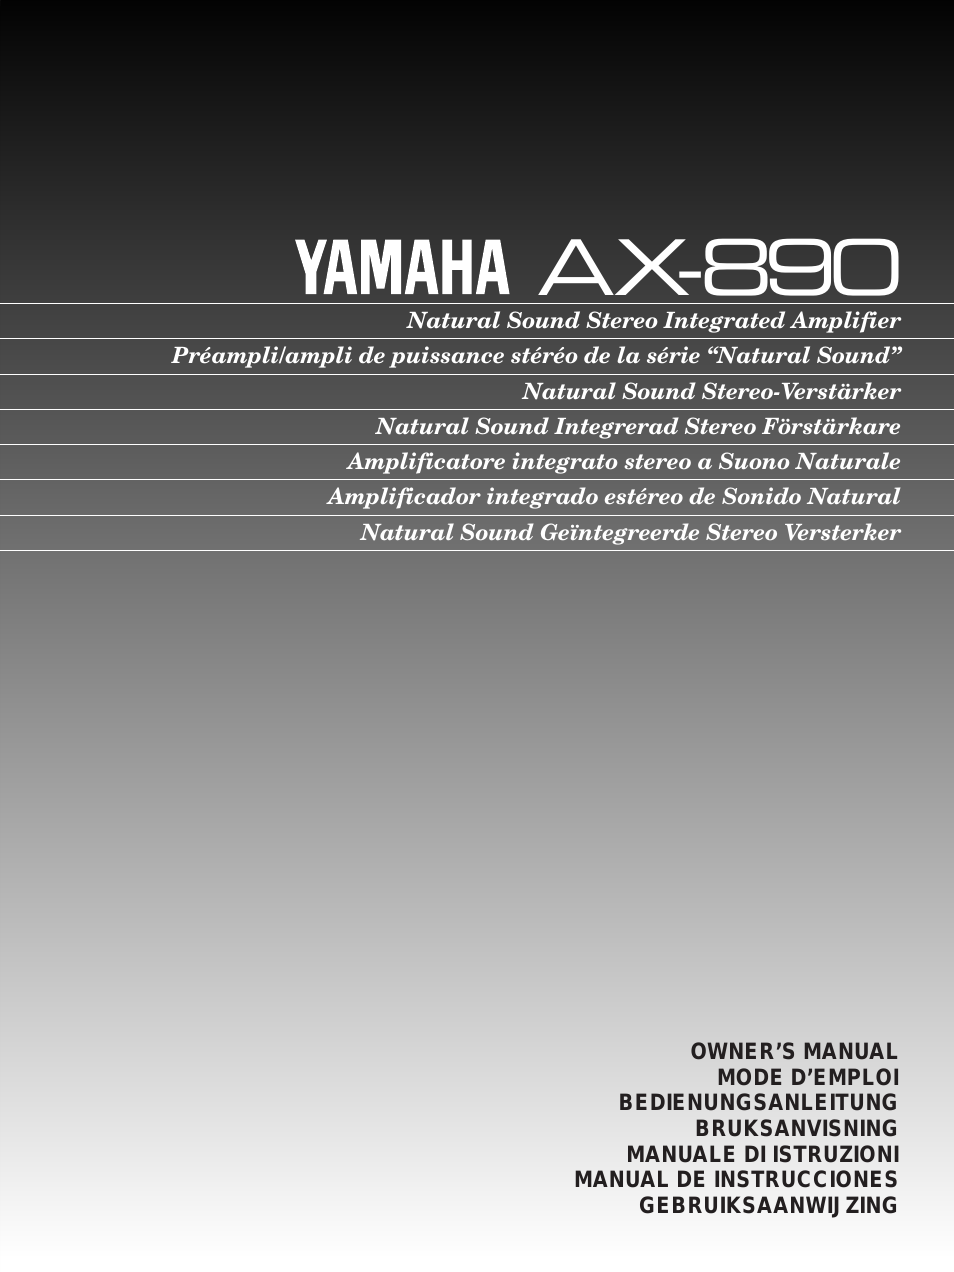 AX-890 (Page 1)